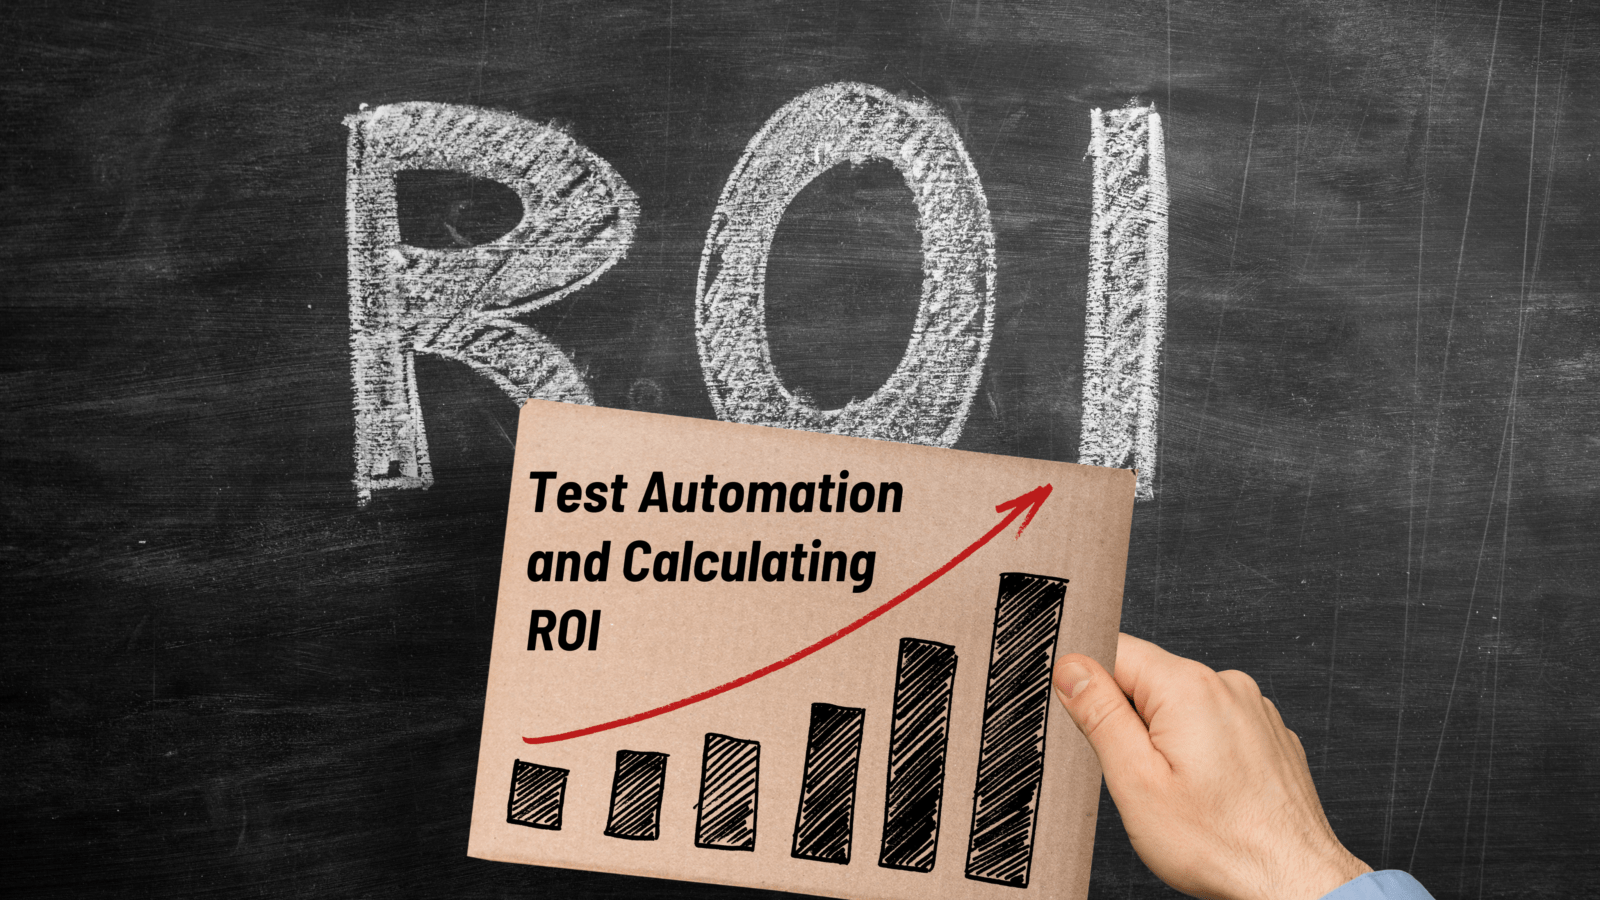 Test Automation and Calculating ROI